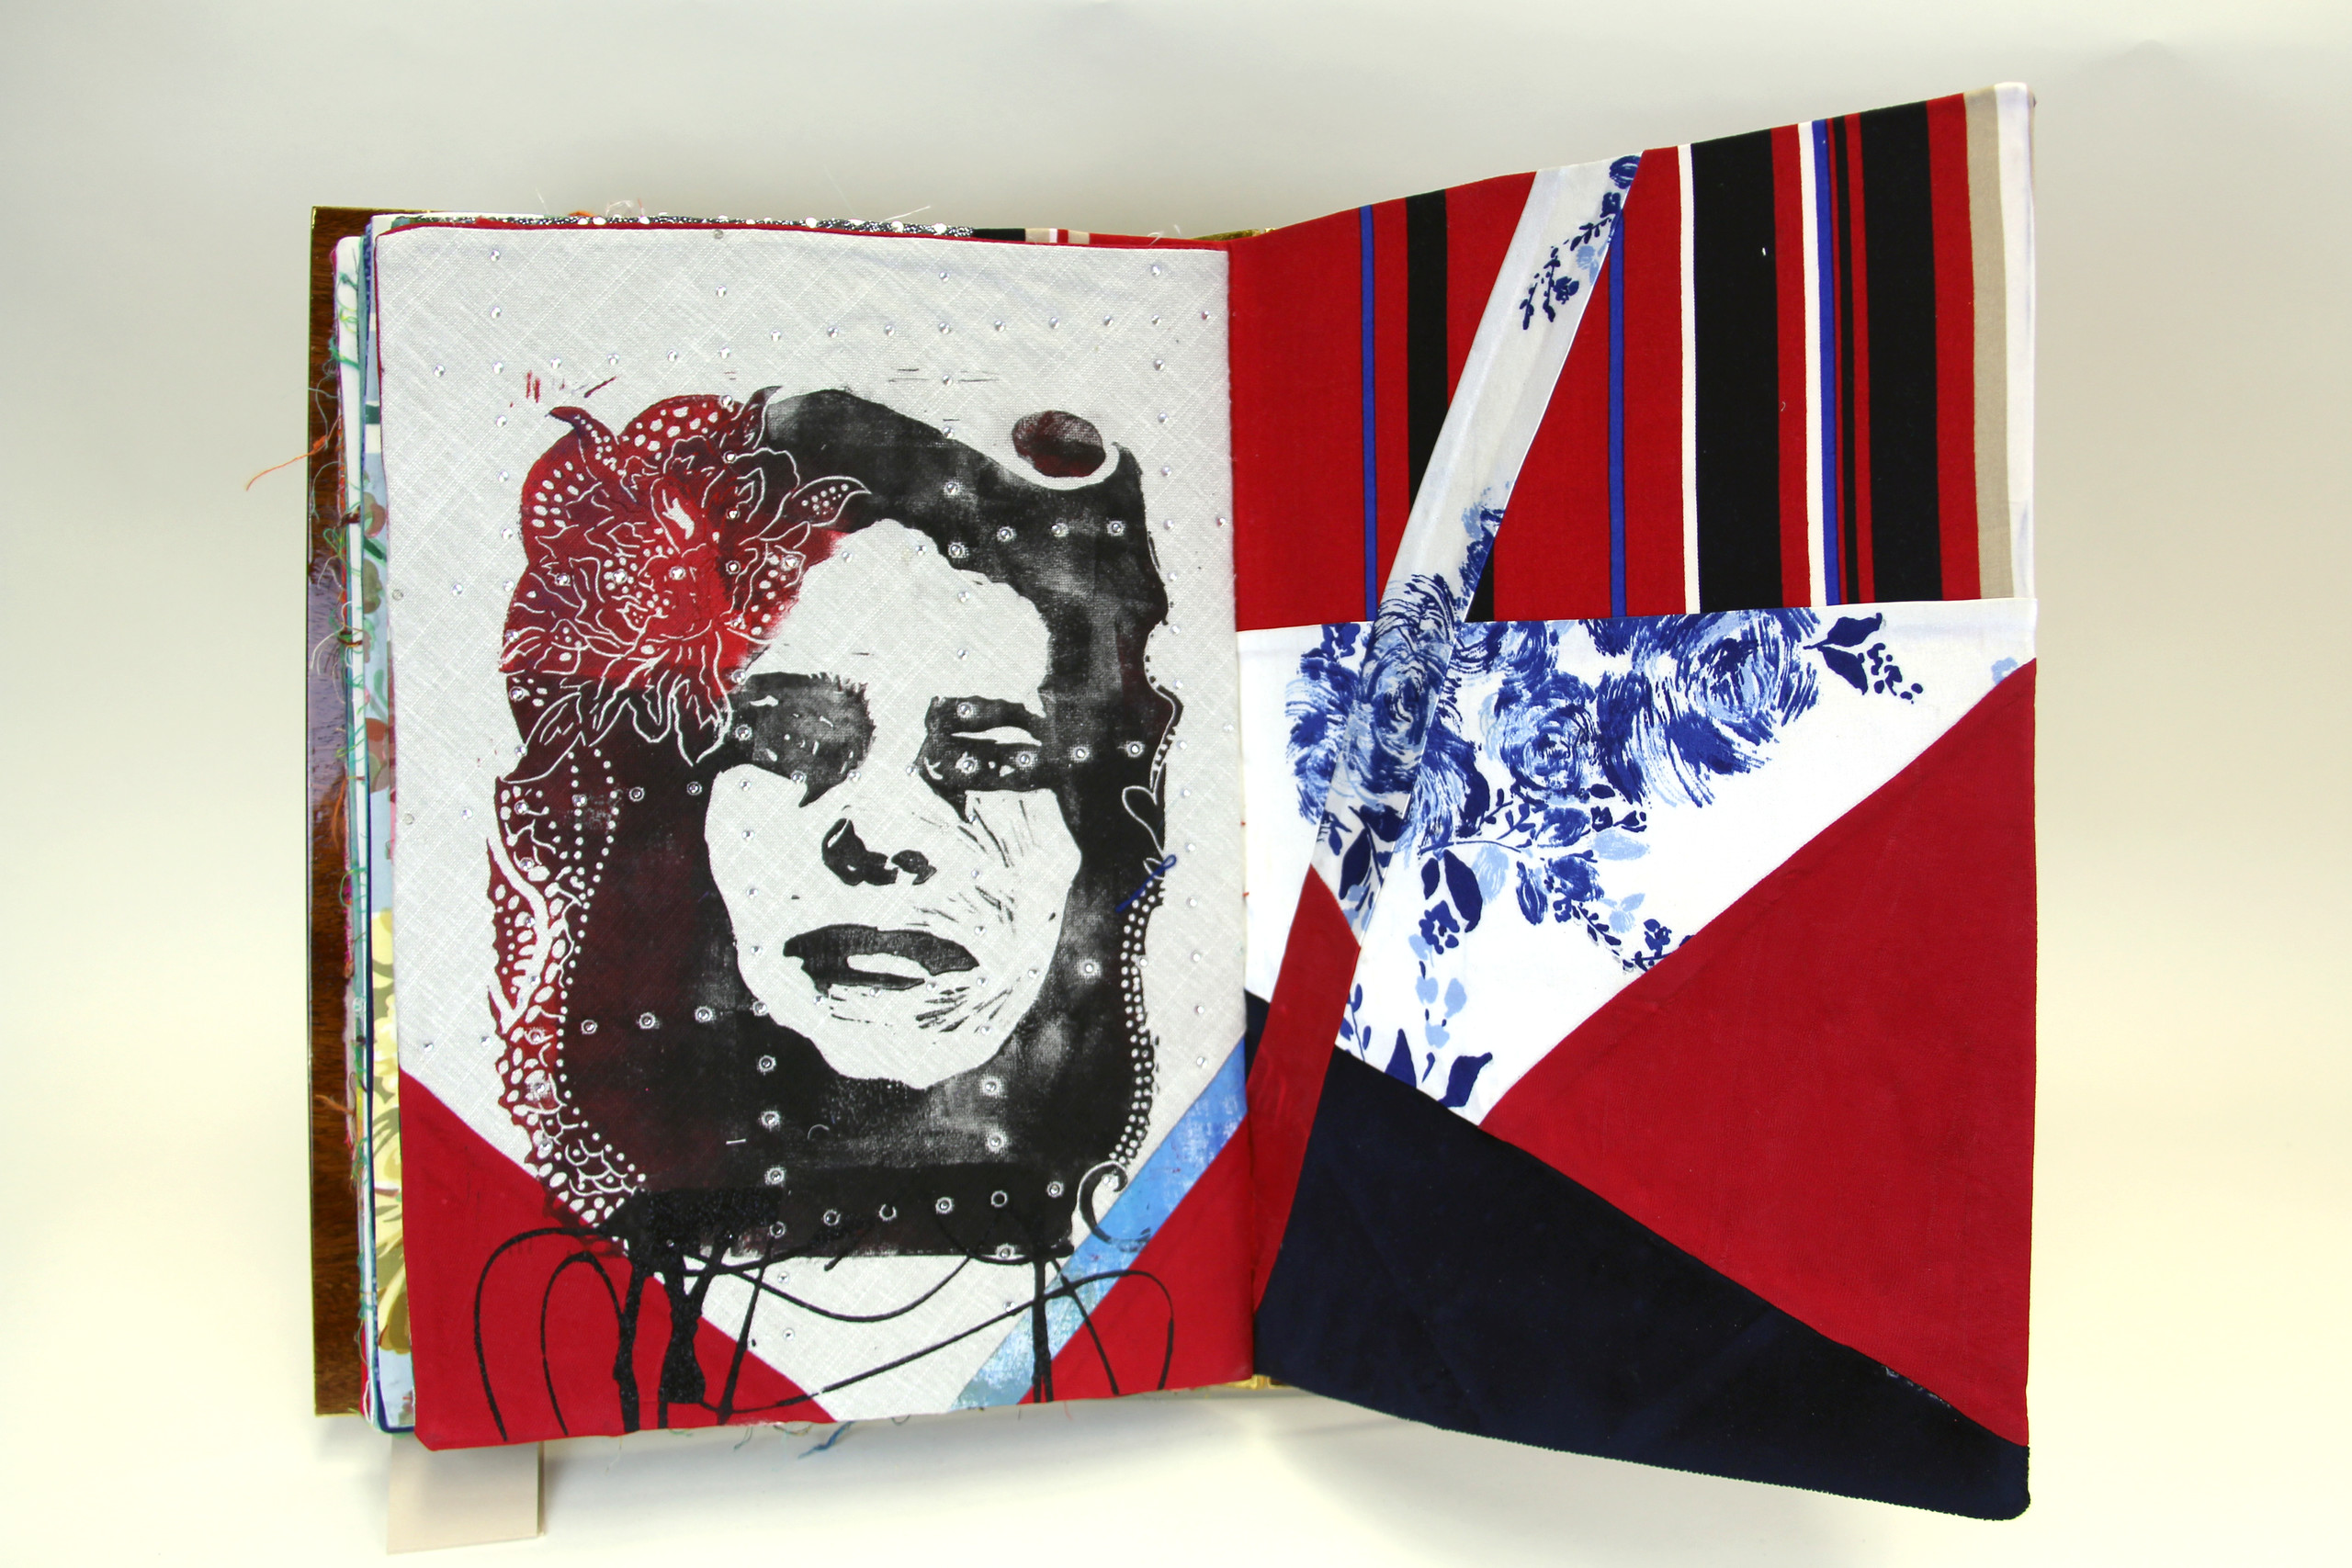 A book made from colorful print fabrics collaged and stitched together is laid flat and open to a spread that features an stencil cut image of a woman's face overlaid with an intricate flower positioned on her hair.